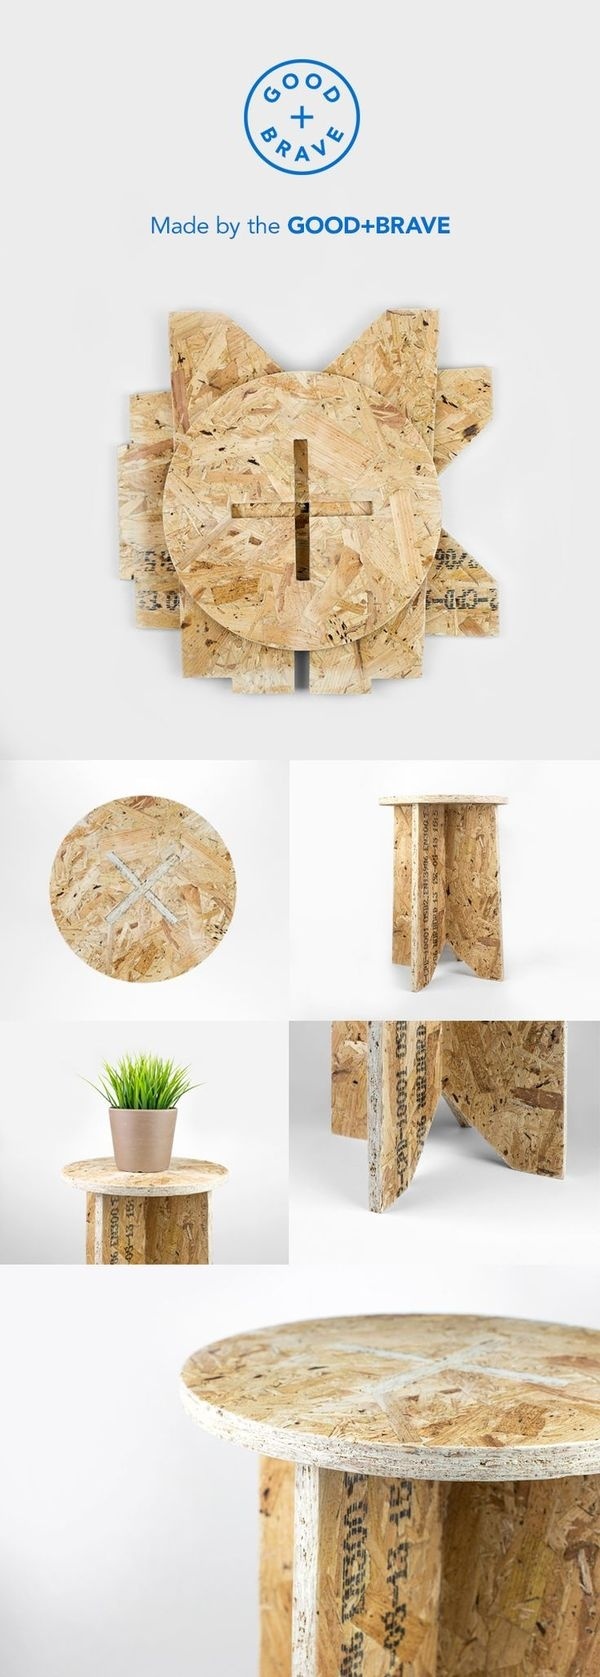 The OSB board Stool Table from Good+Brave. www.goodandbrave.co.uk #osb #wood #furniture #product #handmade #tool #table